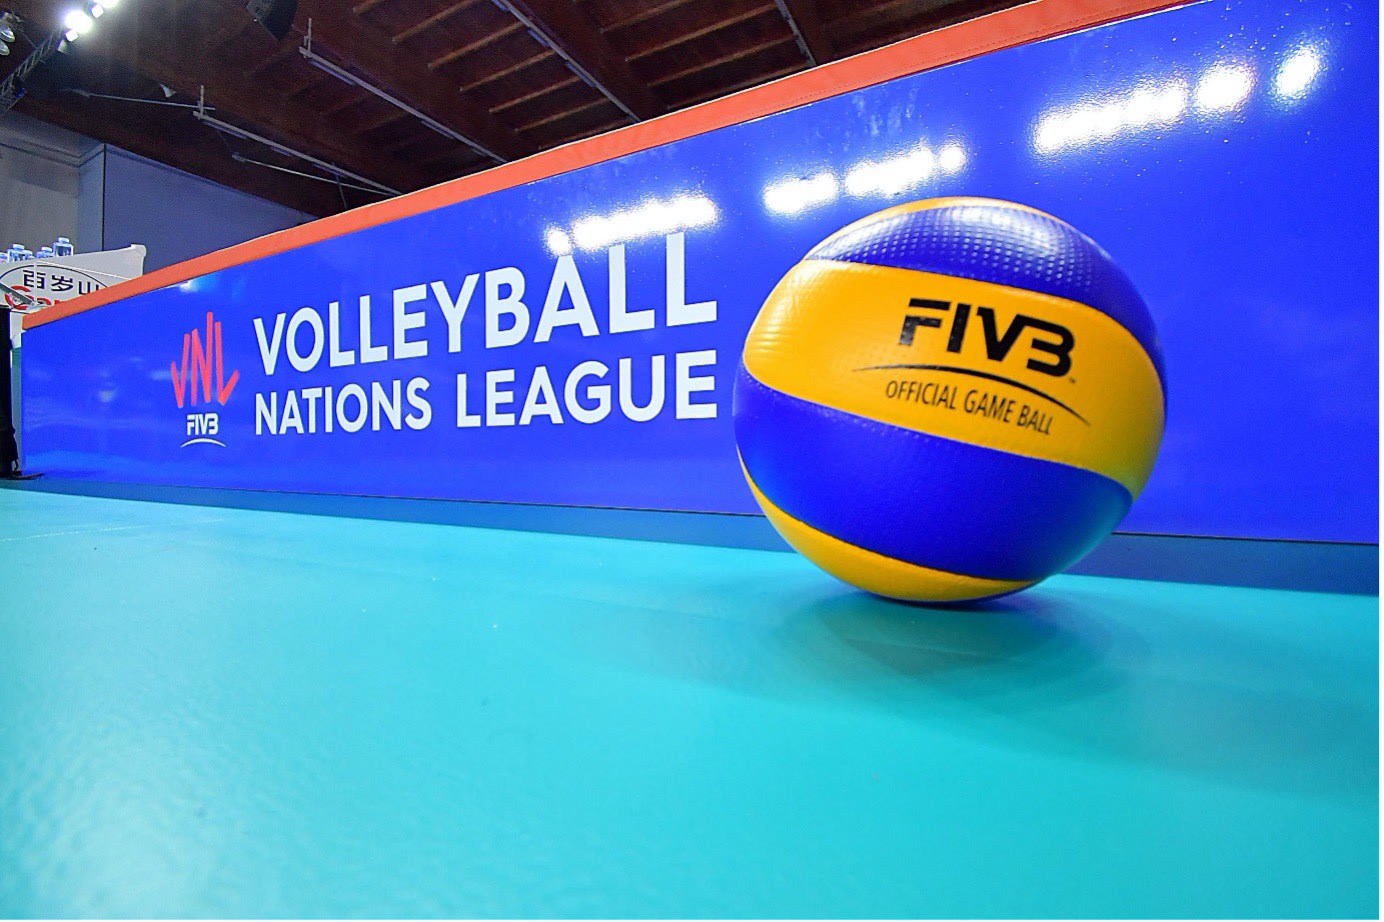 FIVB, Volleyball World and RCS Sports & Events ready to welcome teams at VNL 2021 presented by ENIT – Italian National Tourist Board | volleyballworld.com